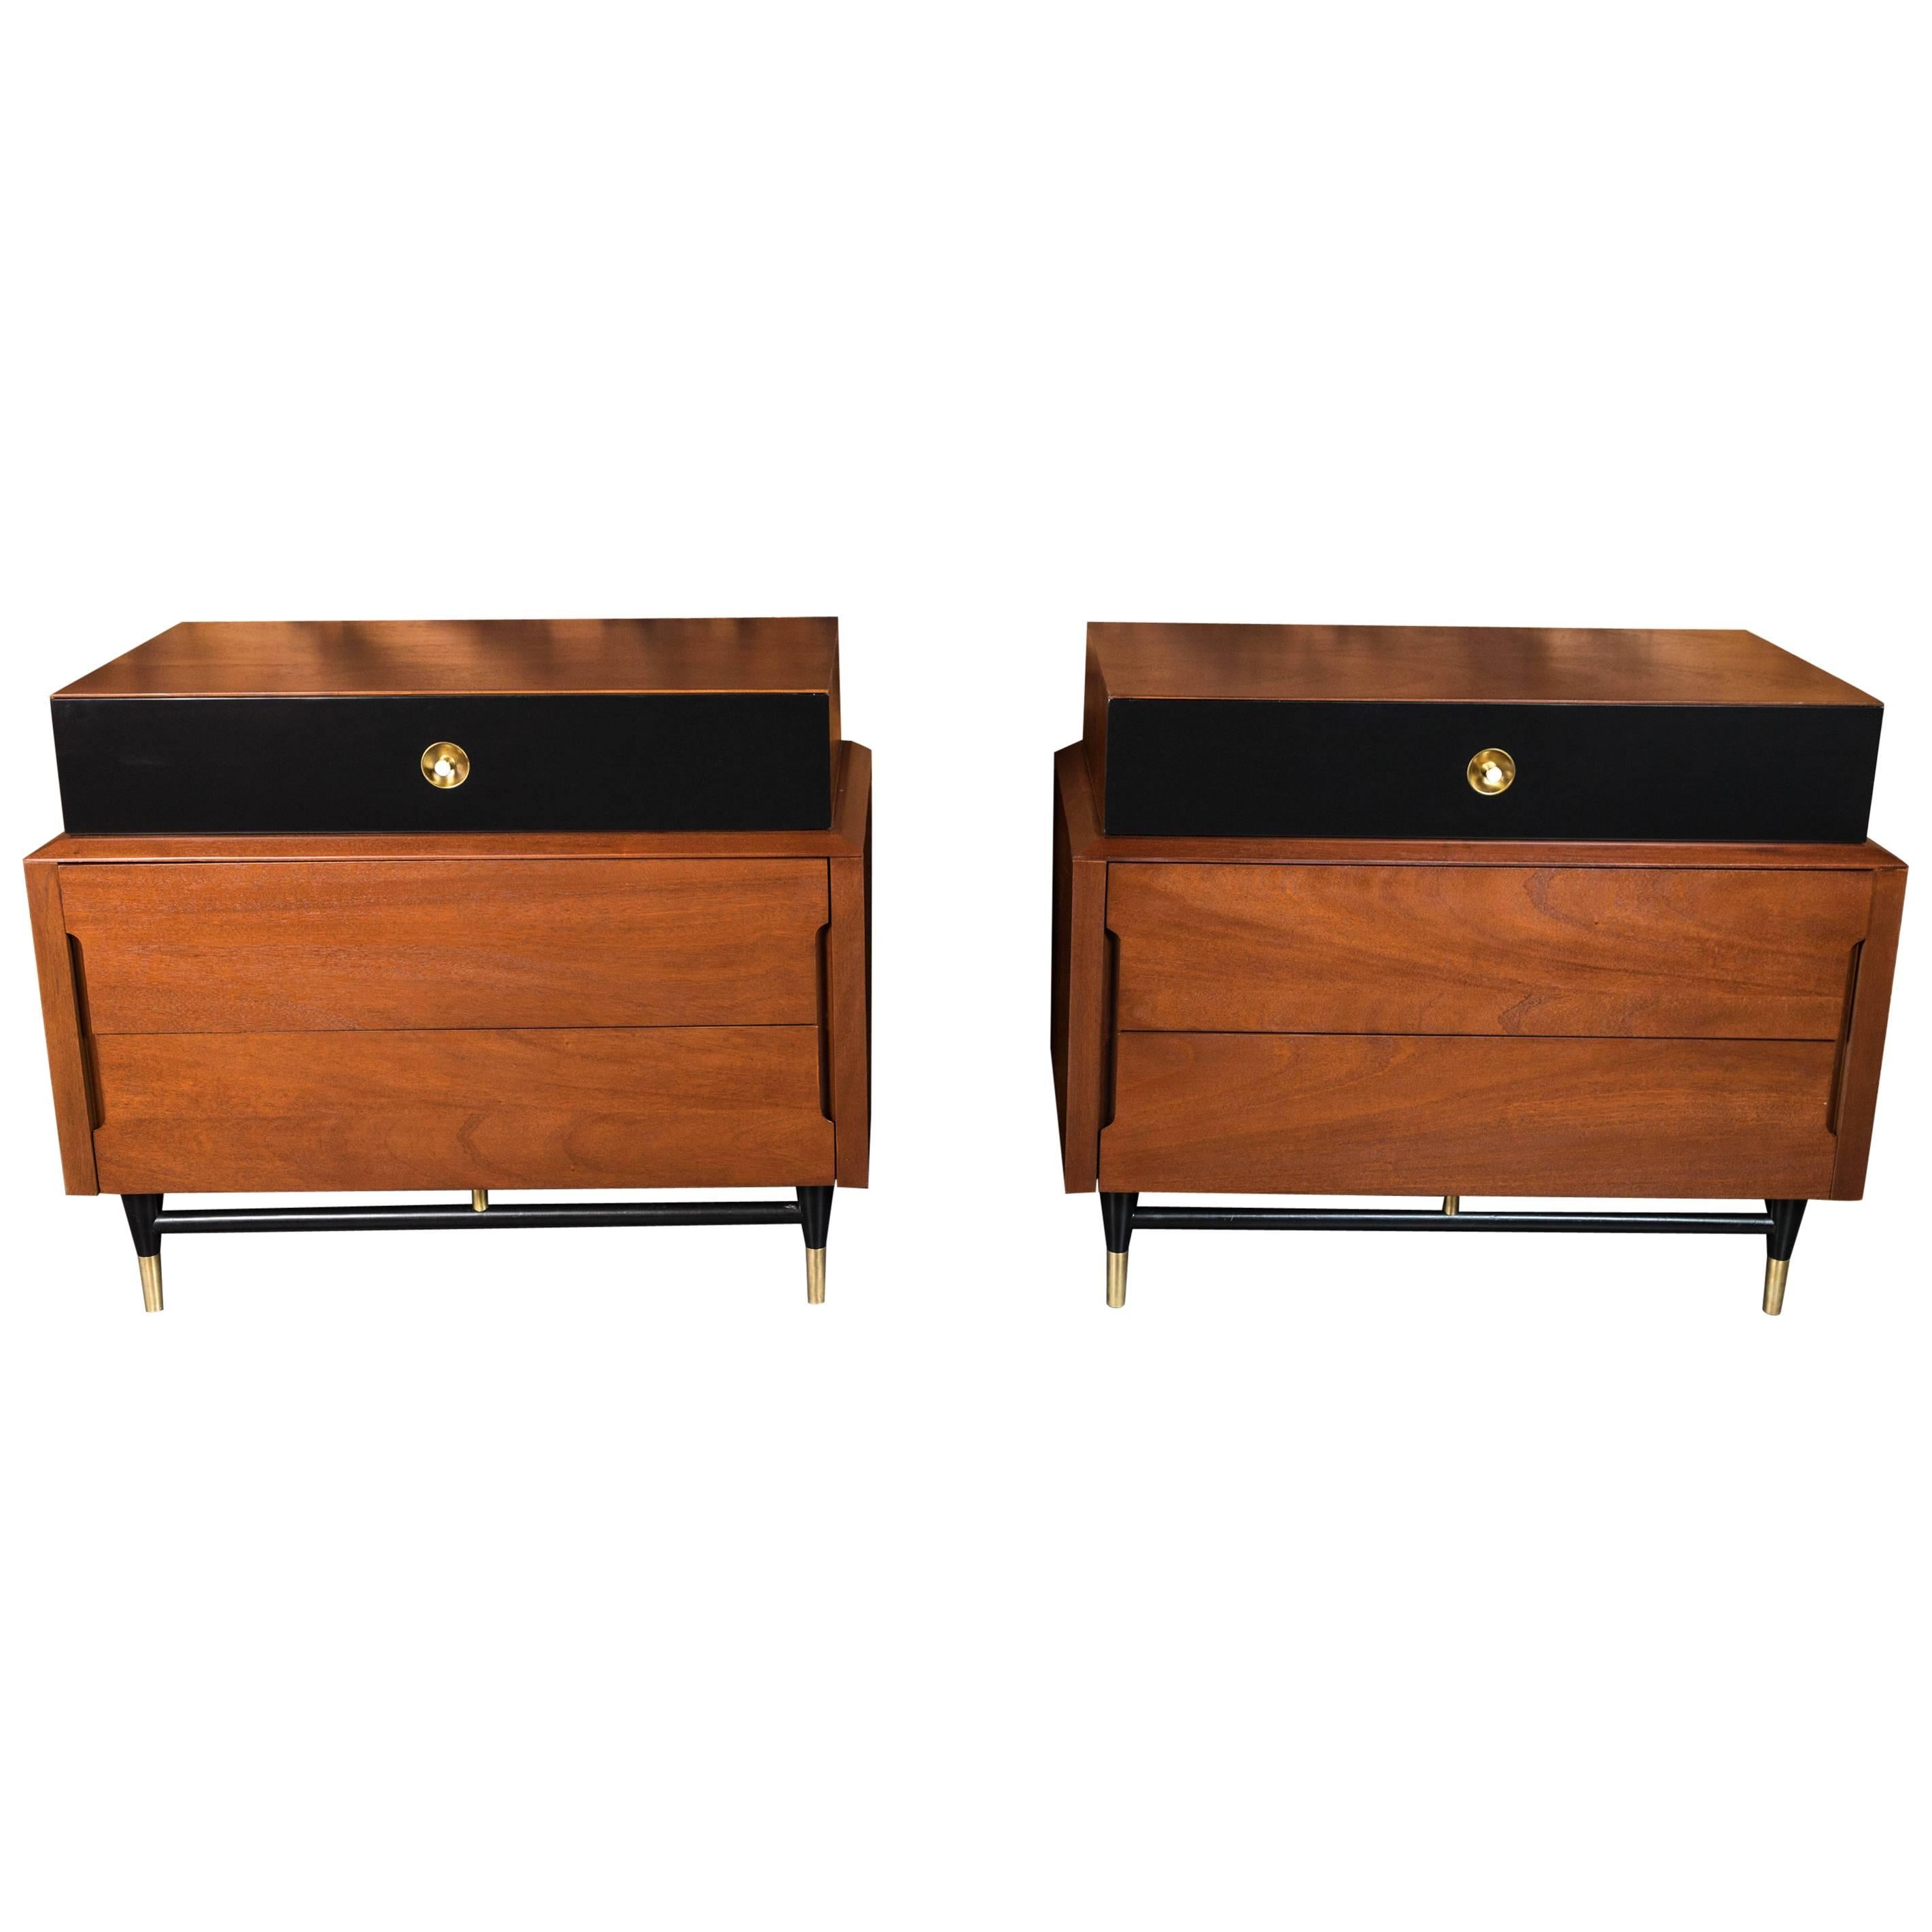 Midcentury Refinished and Lacquered Small Dressers with Brass Details, Pair For Sale